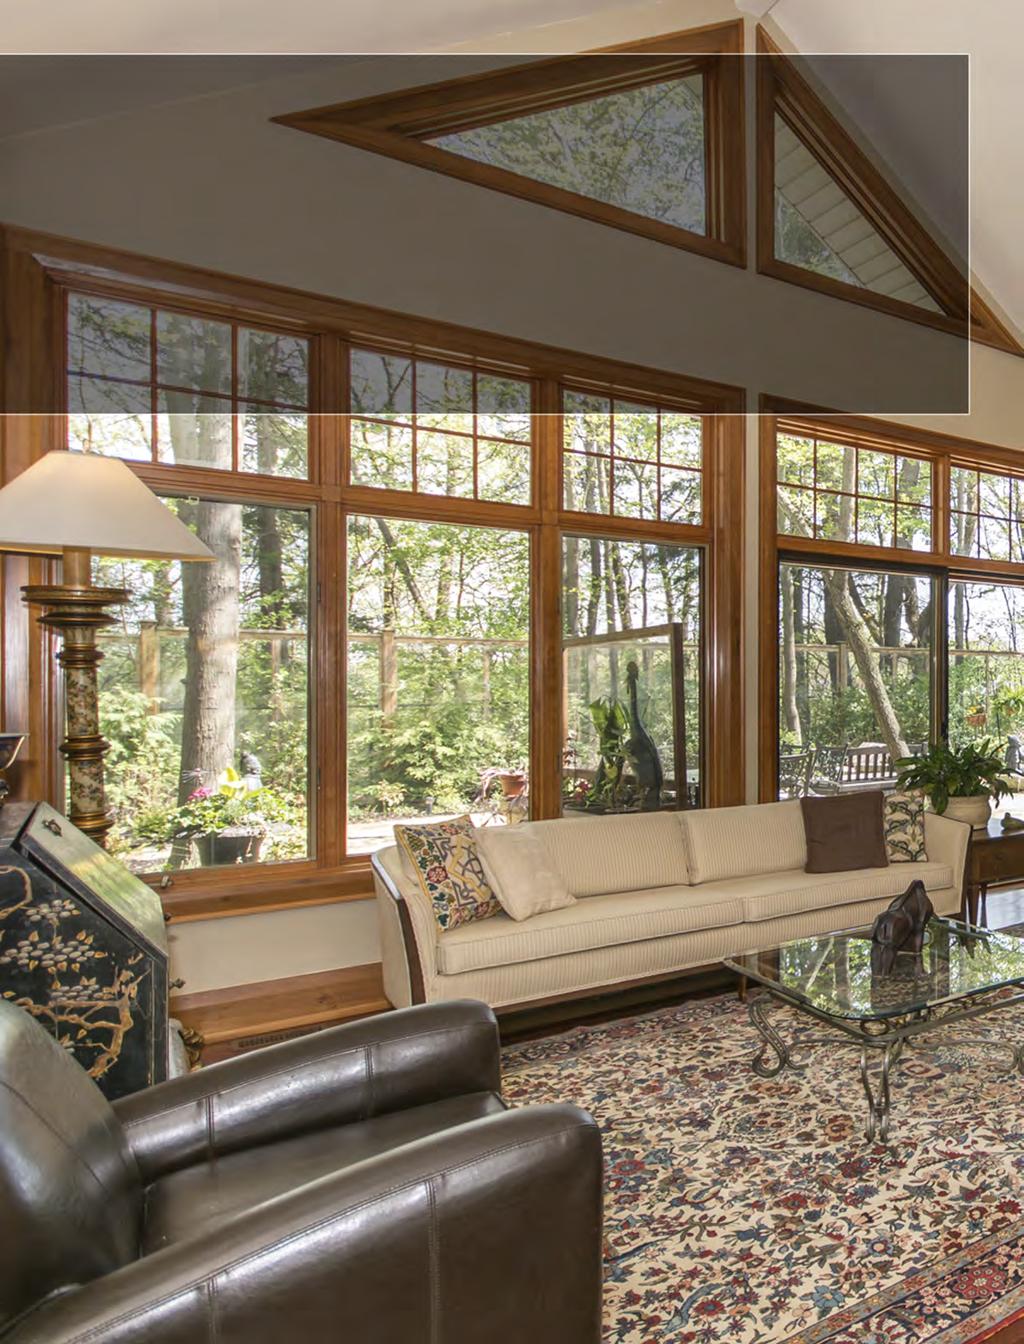 Designed by renowned Architect David Small and Inspired by Frank Lloyd Wright s; bringing the outside in, this executive, custom-built raised bungalow caters to those of you with discerning style and